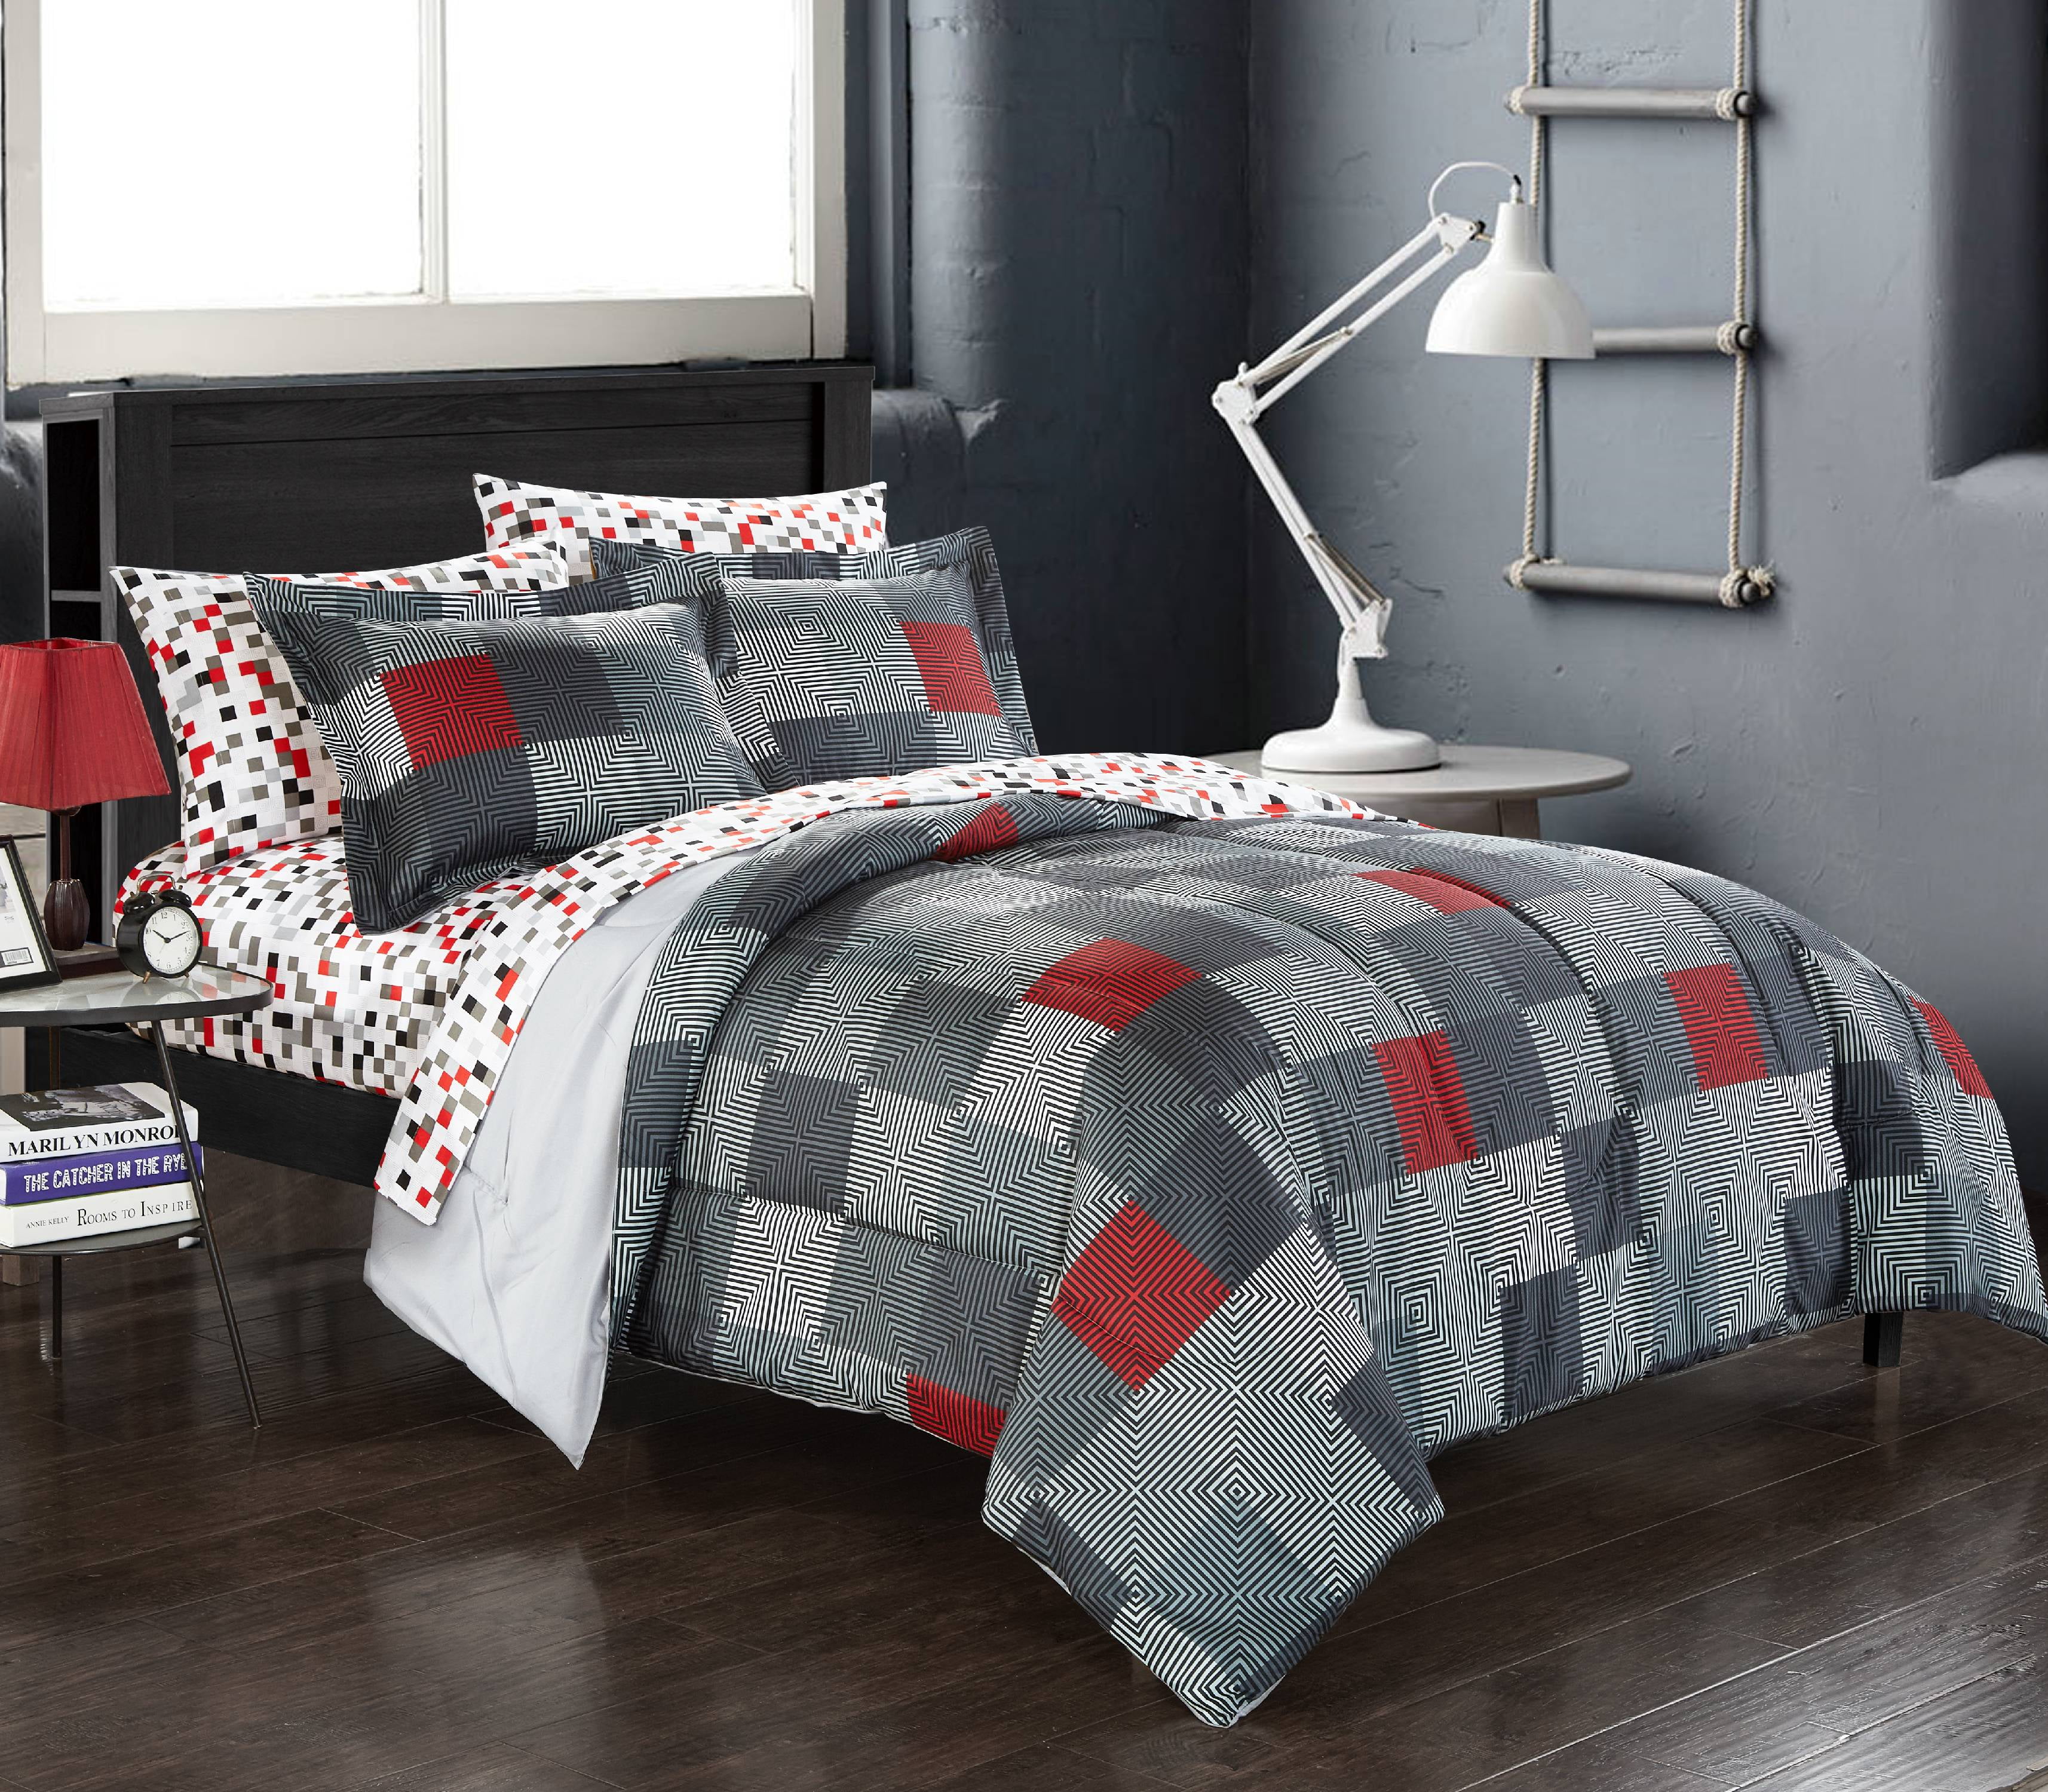 Minecraft Bedding Comforter Set Bed in a Bag Geo Reversible Gray Red Twin SIze 